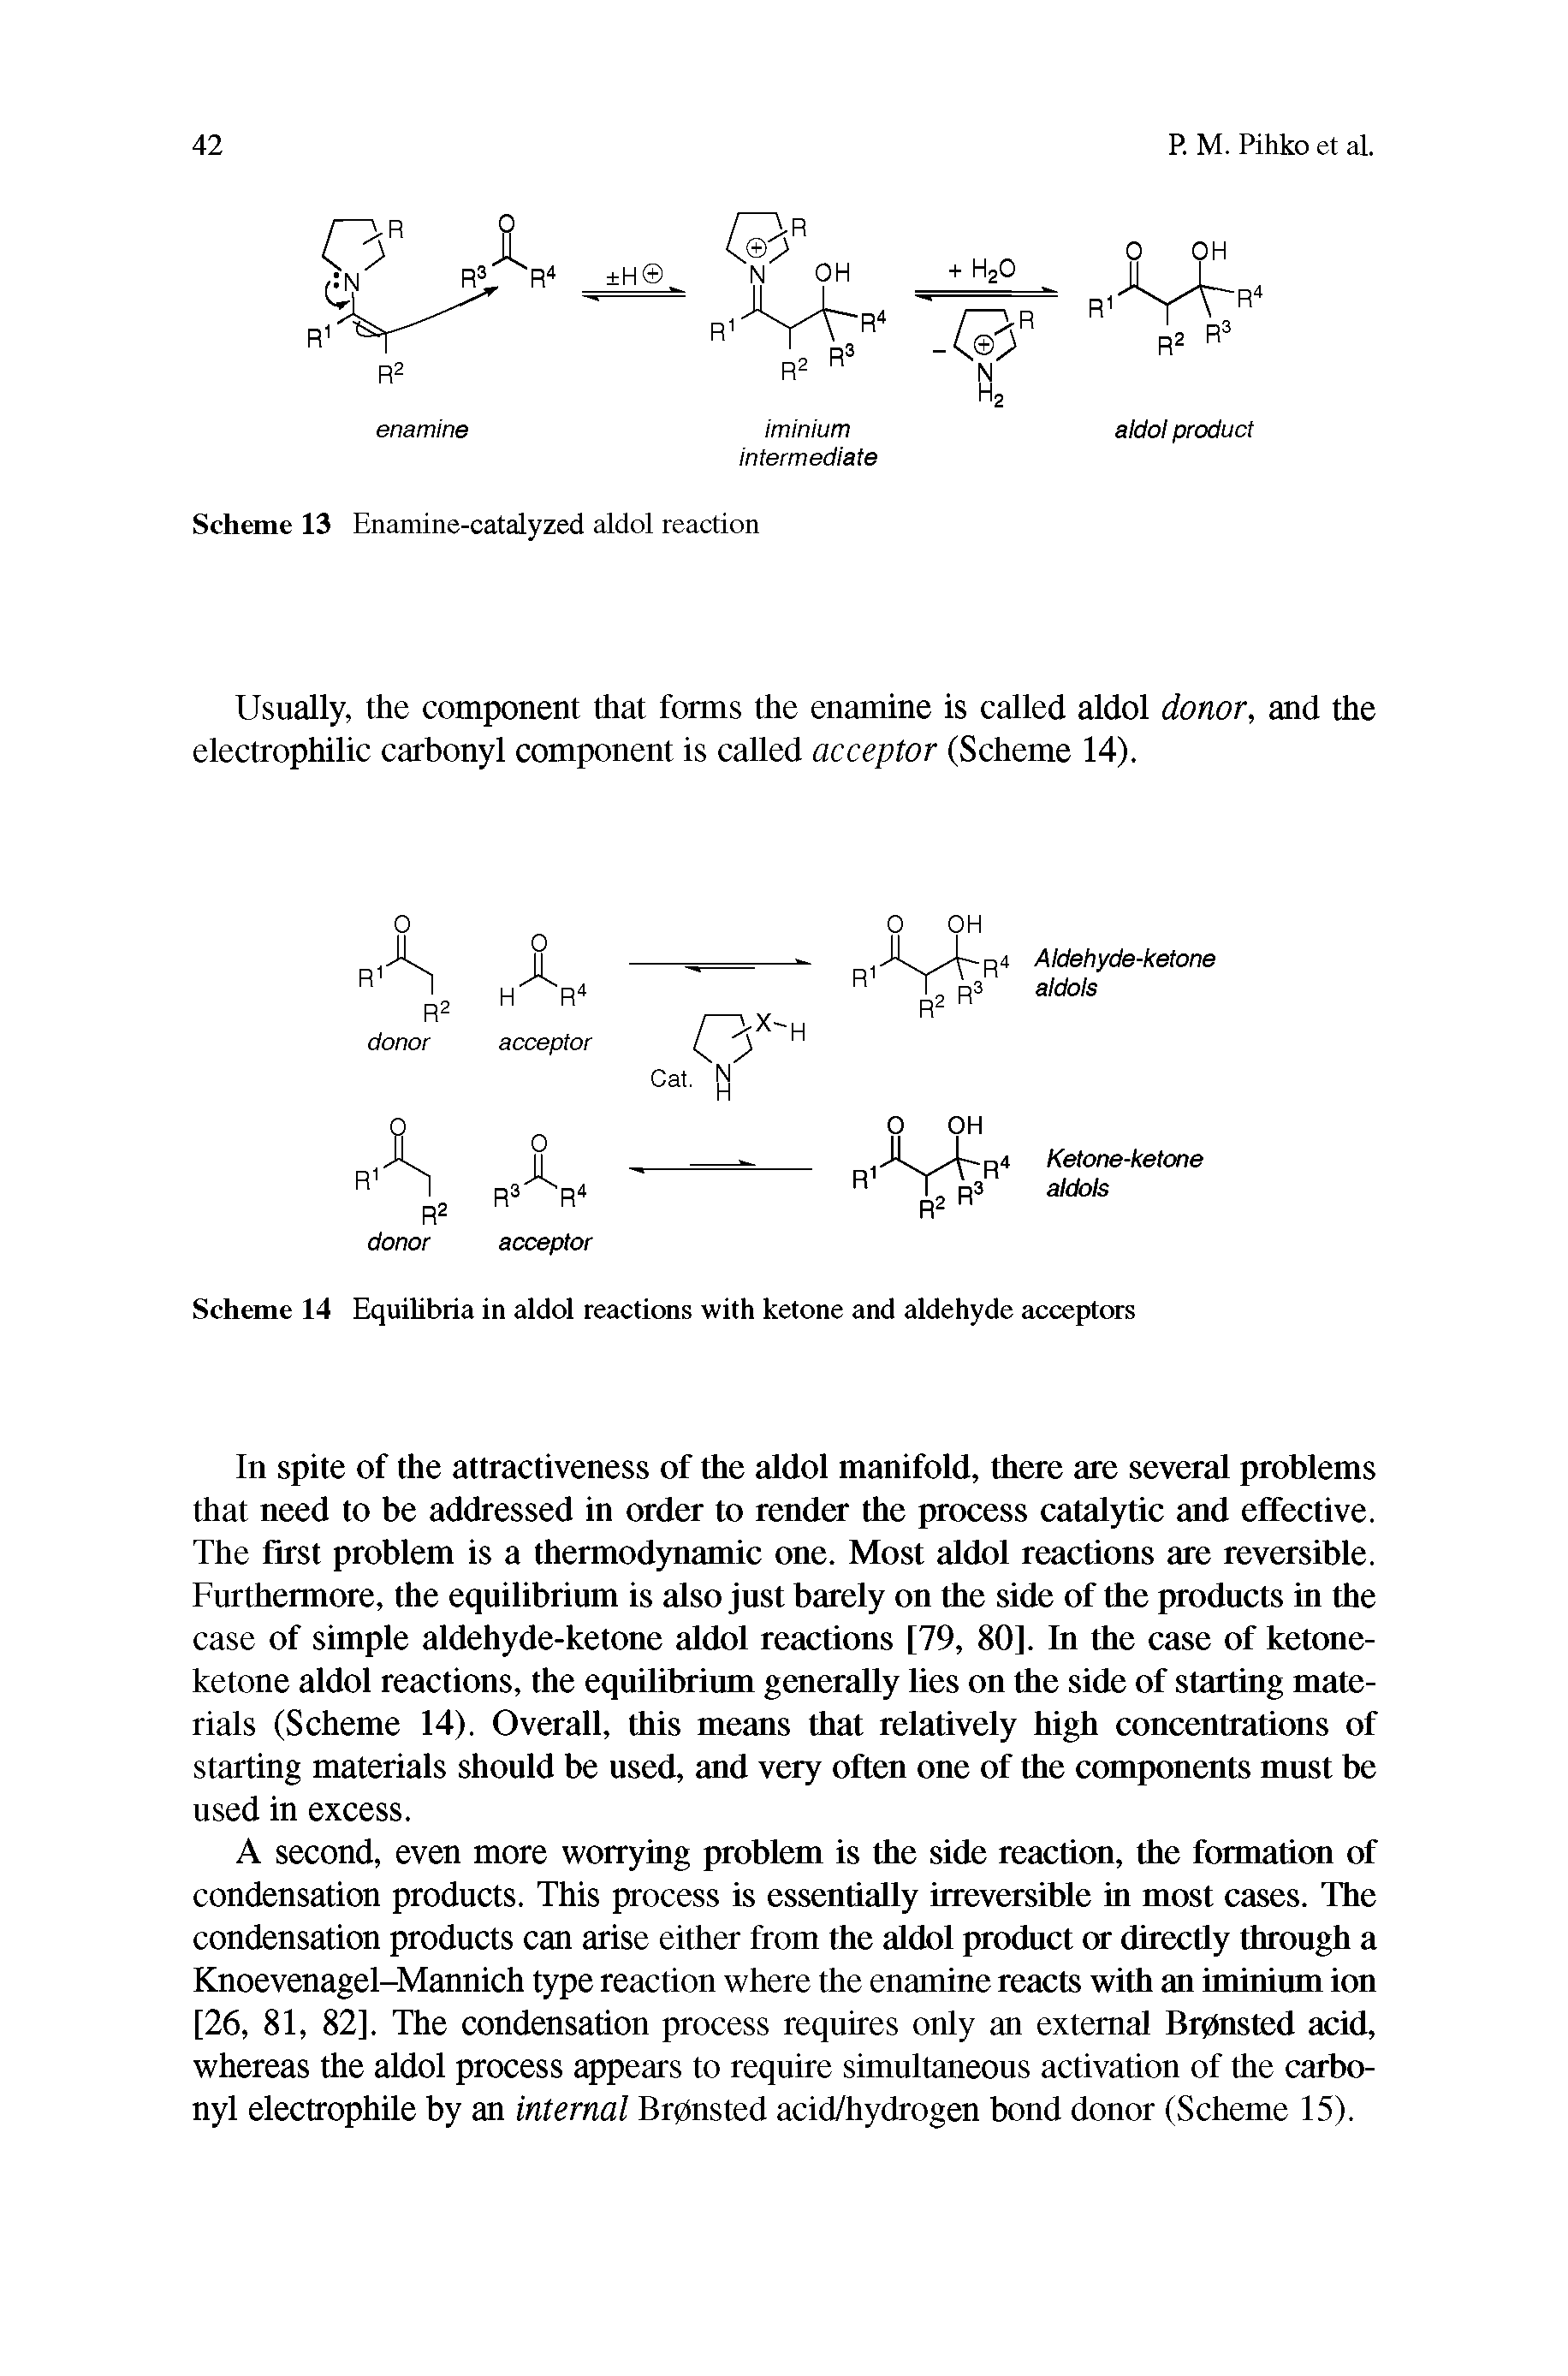 Scheme 14 Equilibria in aldol reactions with ketone and aldehyde acceptors...